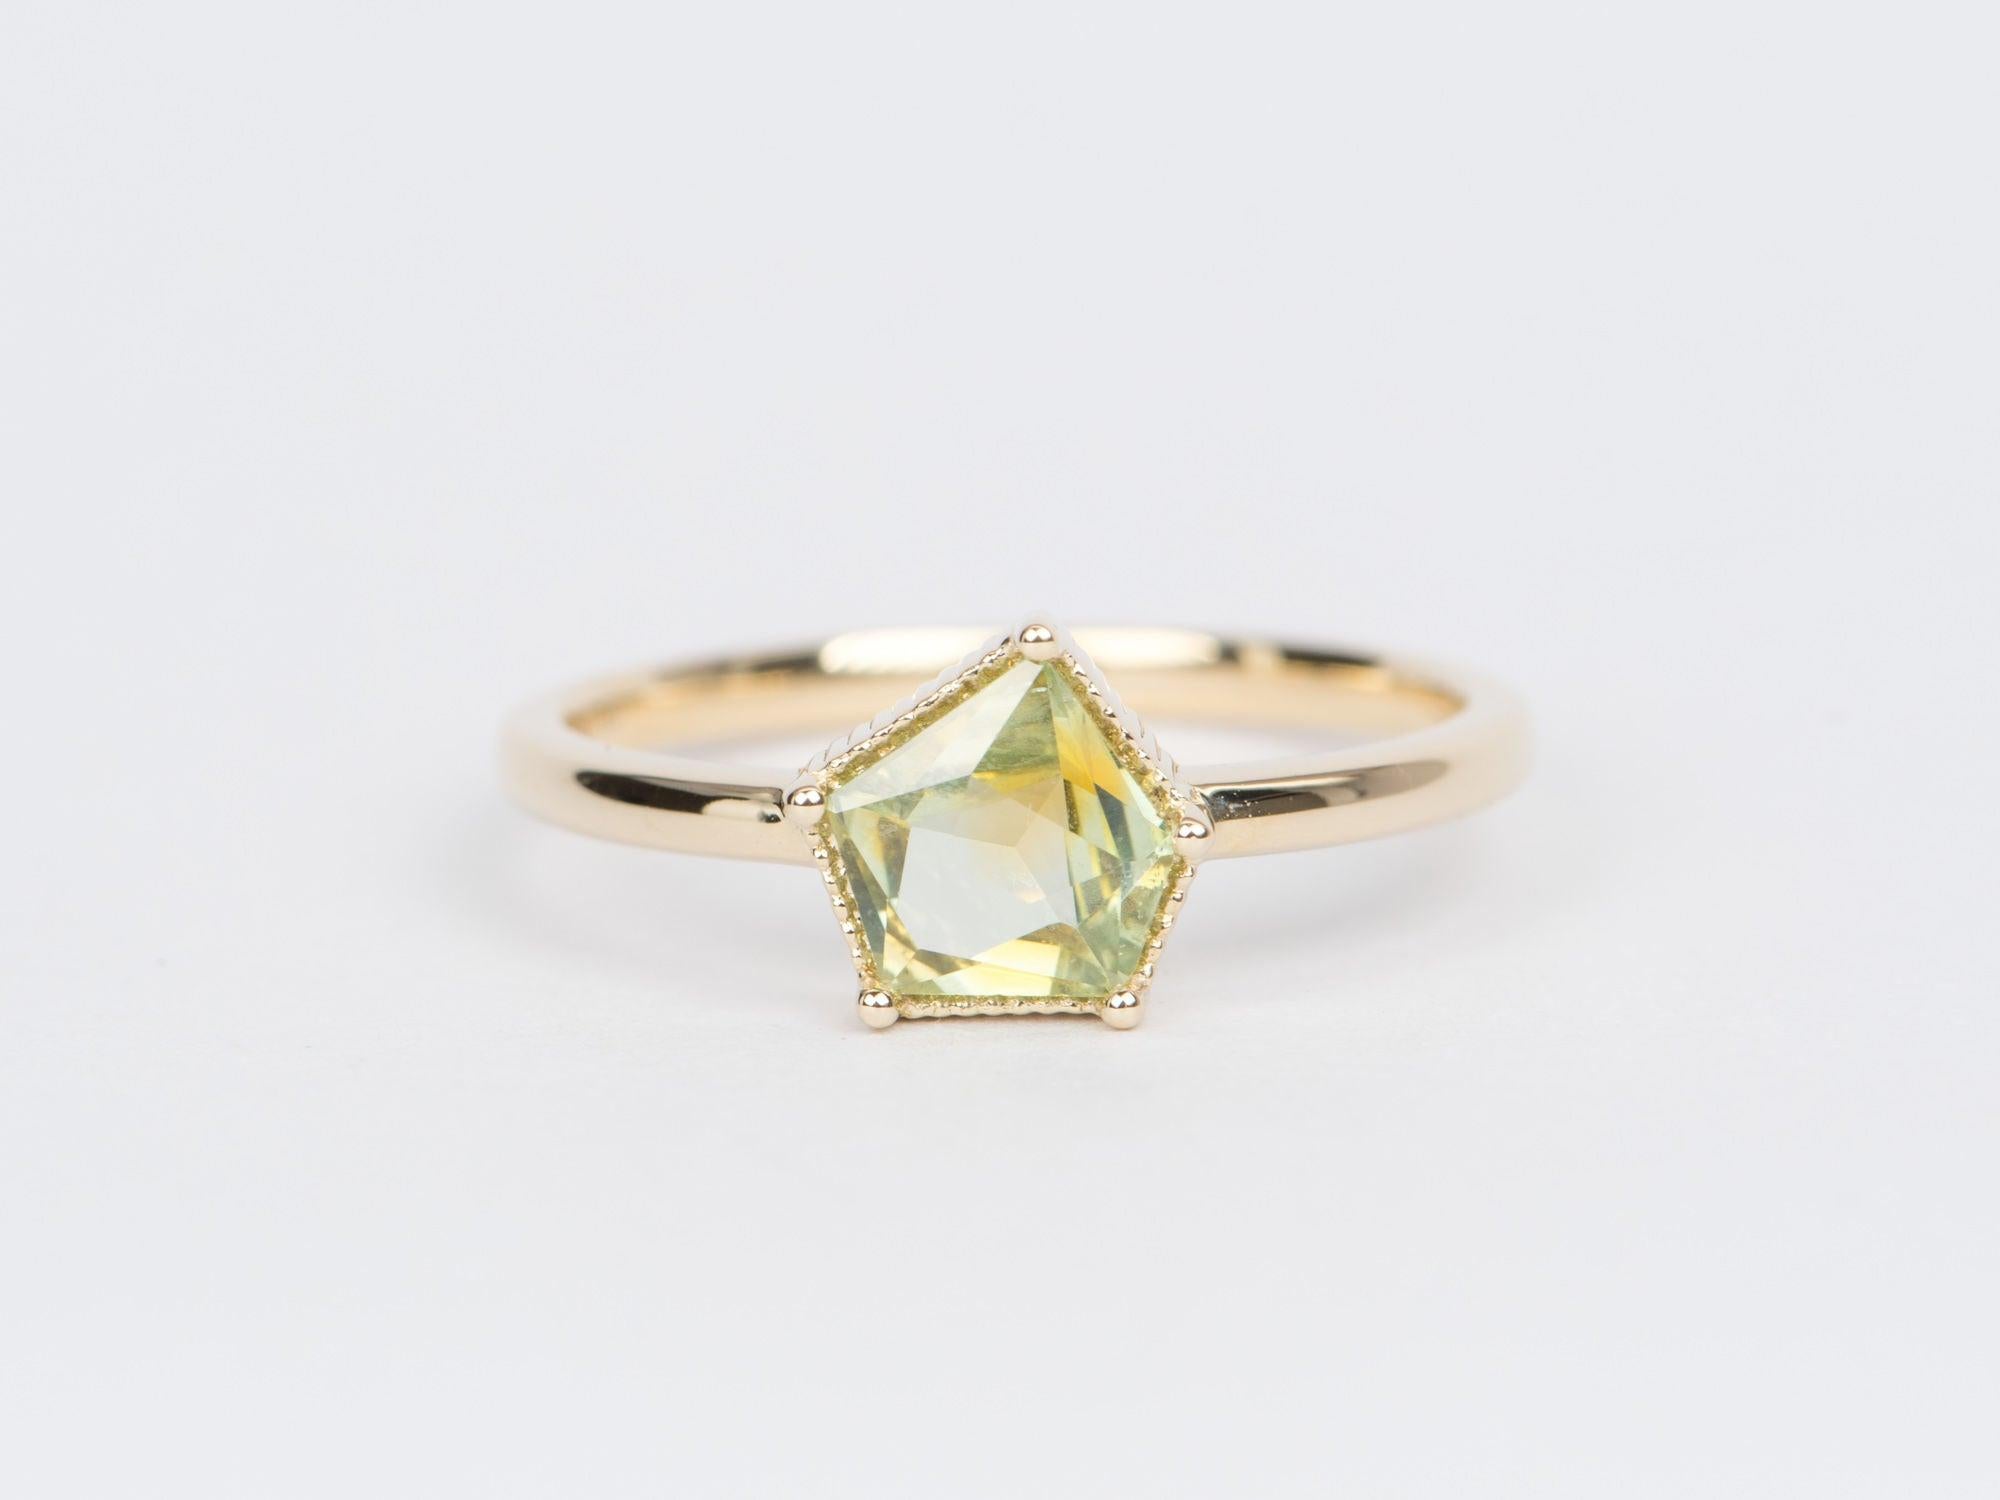 ♥ Geo Cut Green Montana Sapphire Solitaire Ring 14K Gold
♥ Solid 14K Yellow Gold ring set with beautiful Geometric-shaped Montana Sapphire
♥ Gorgeous Green color!
♥ The item measures 7.6 MM in length, 8.1 MM in width, and 3.4 MM in height.

♥ Ring